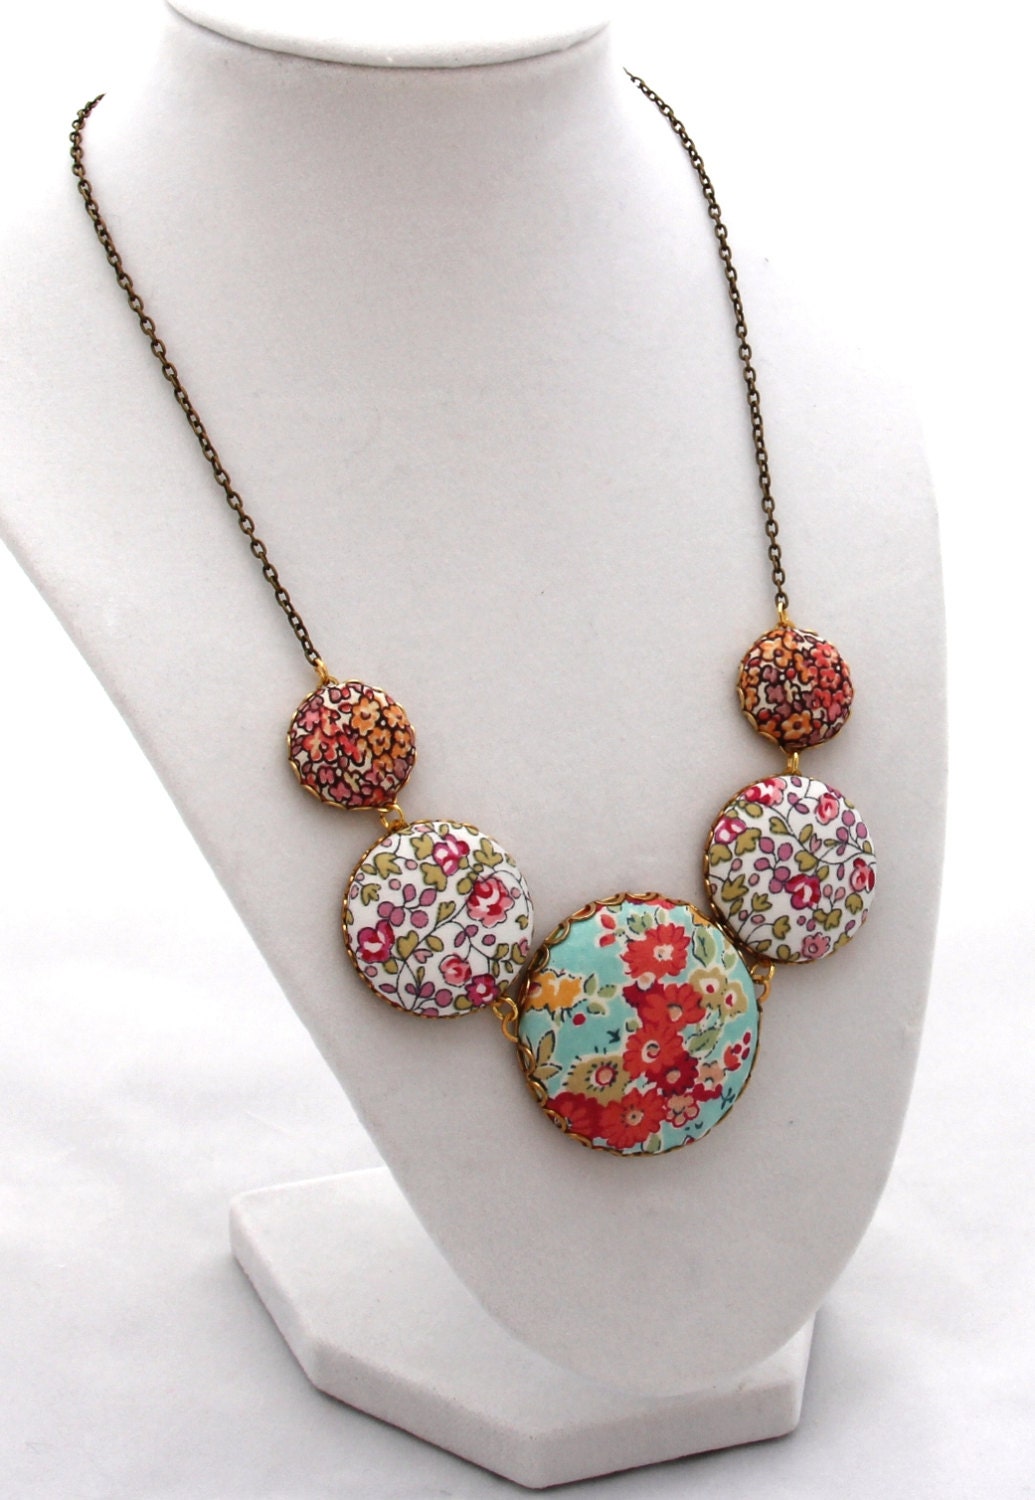 Boho Chic Fabric Button Necklace Spring